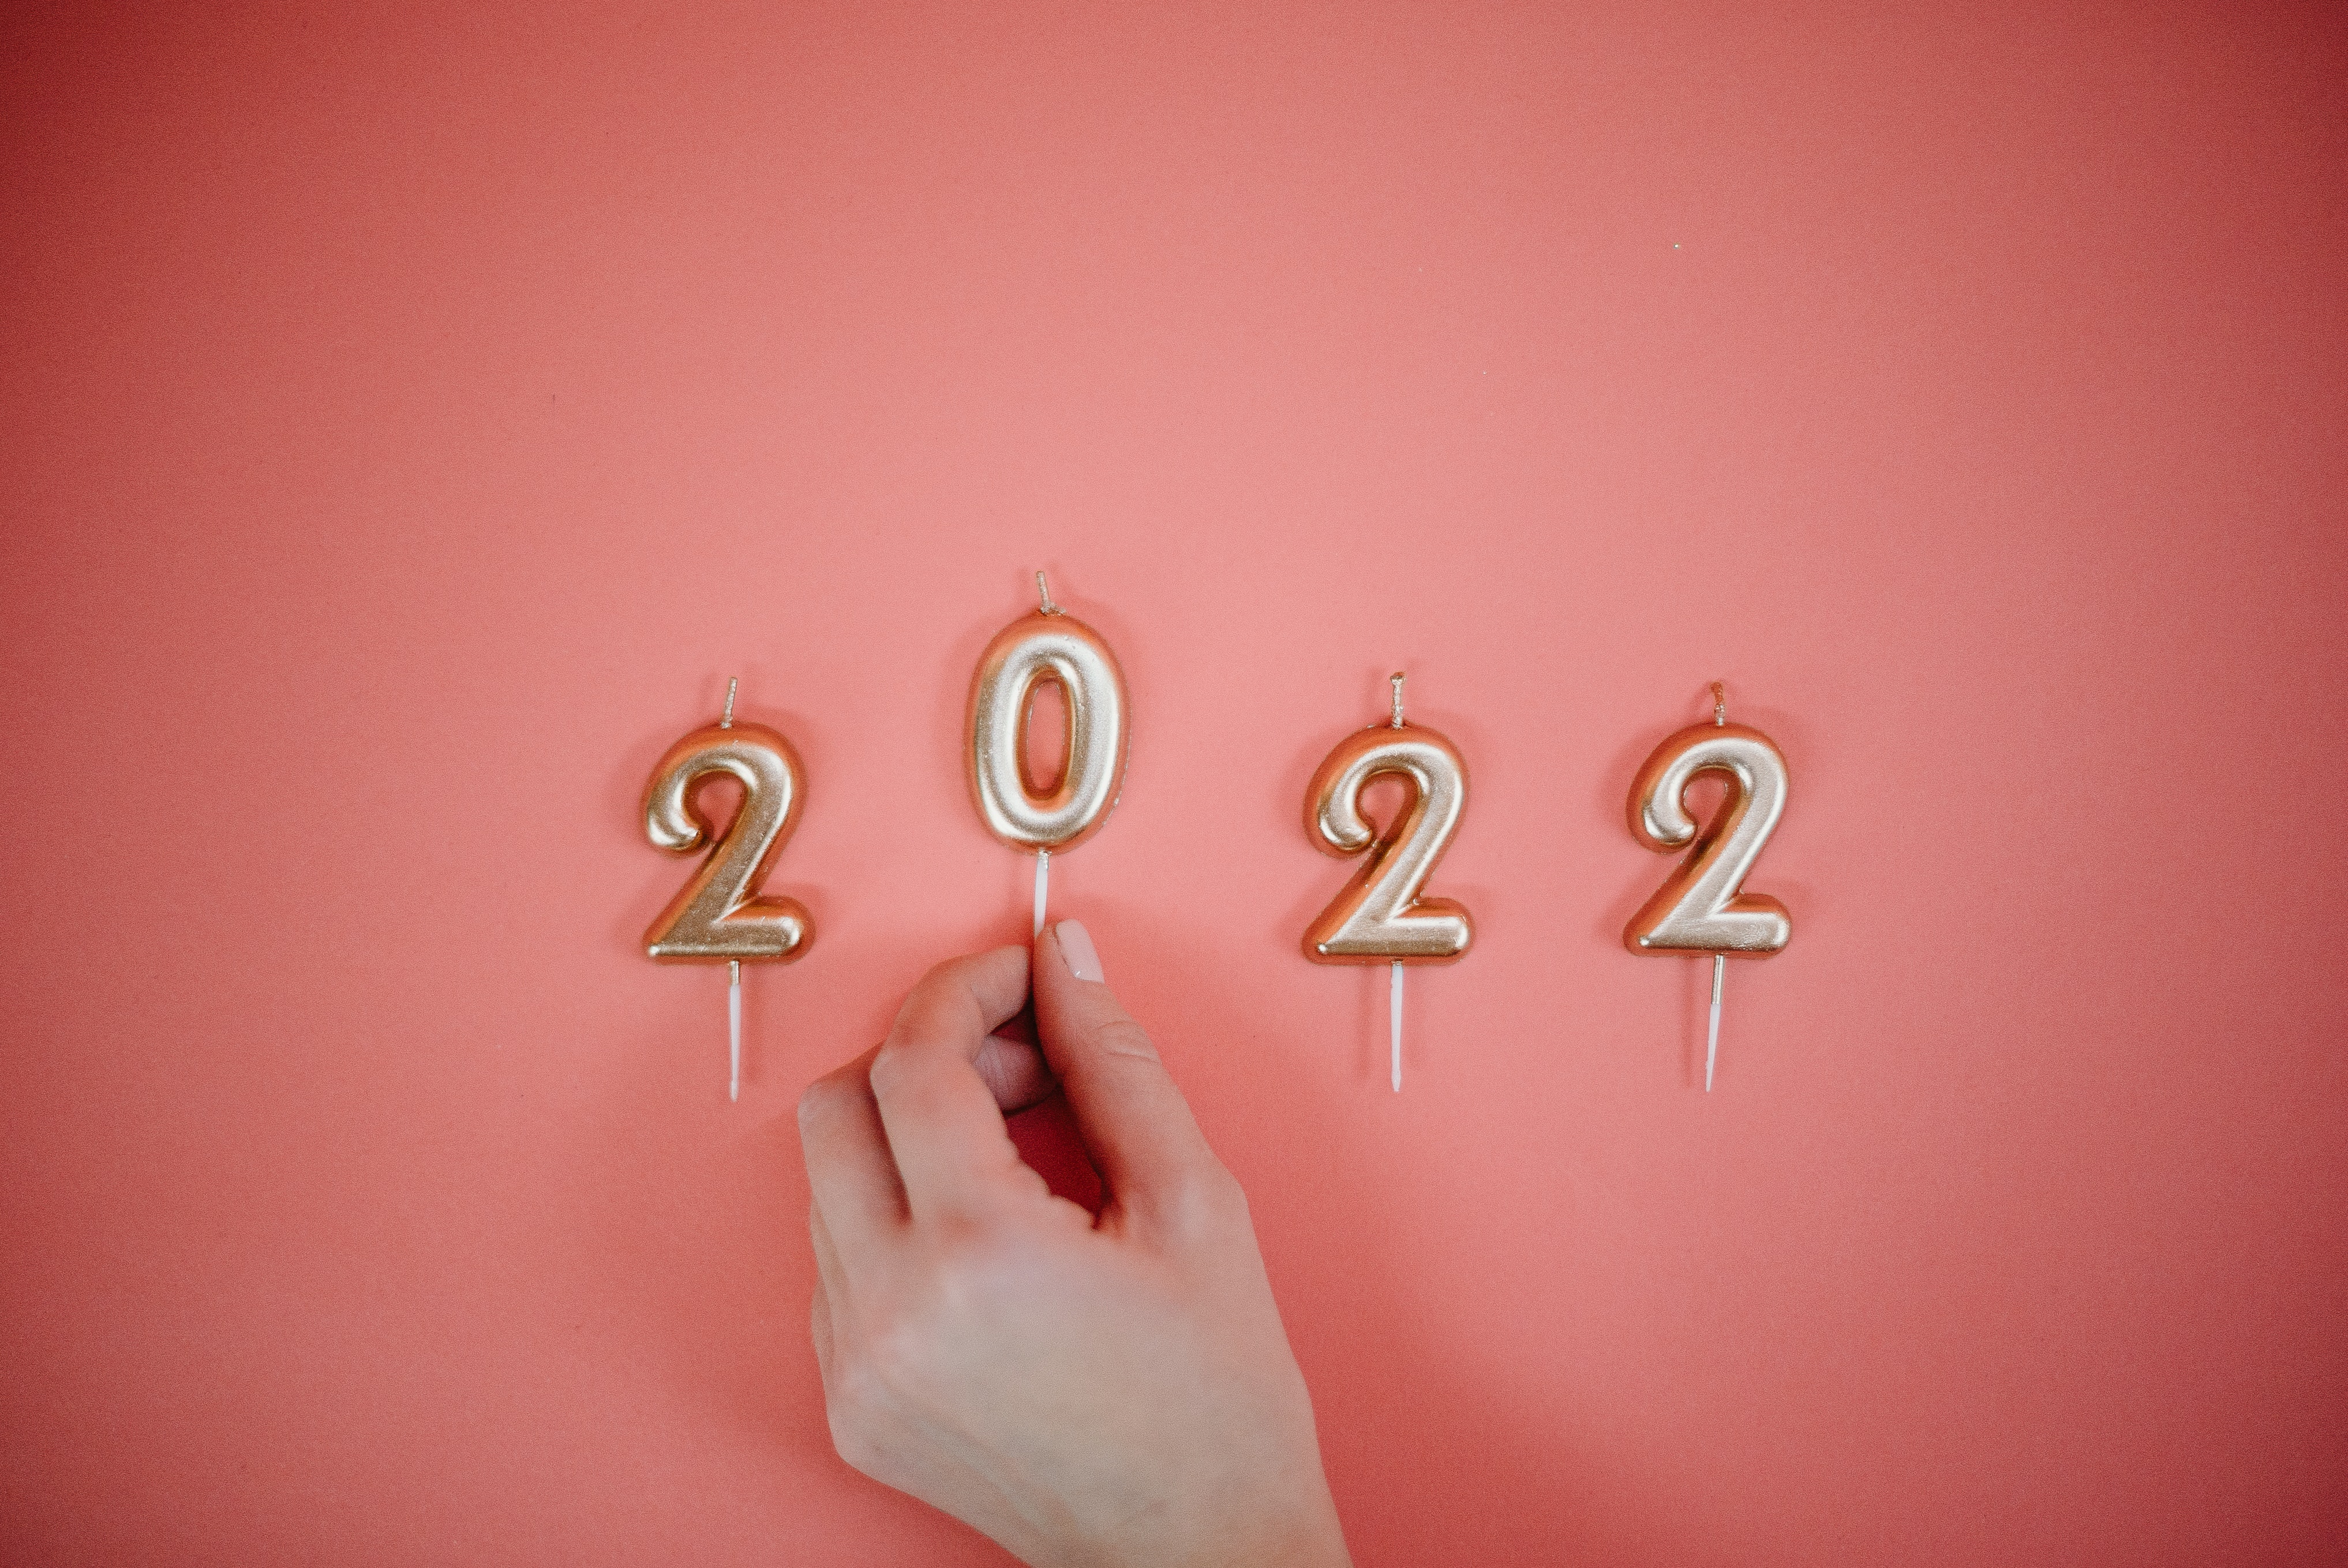 The numbers of 2022 laid out against a pink background as candles, with a hand that is moving the 0